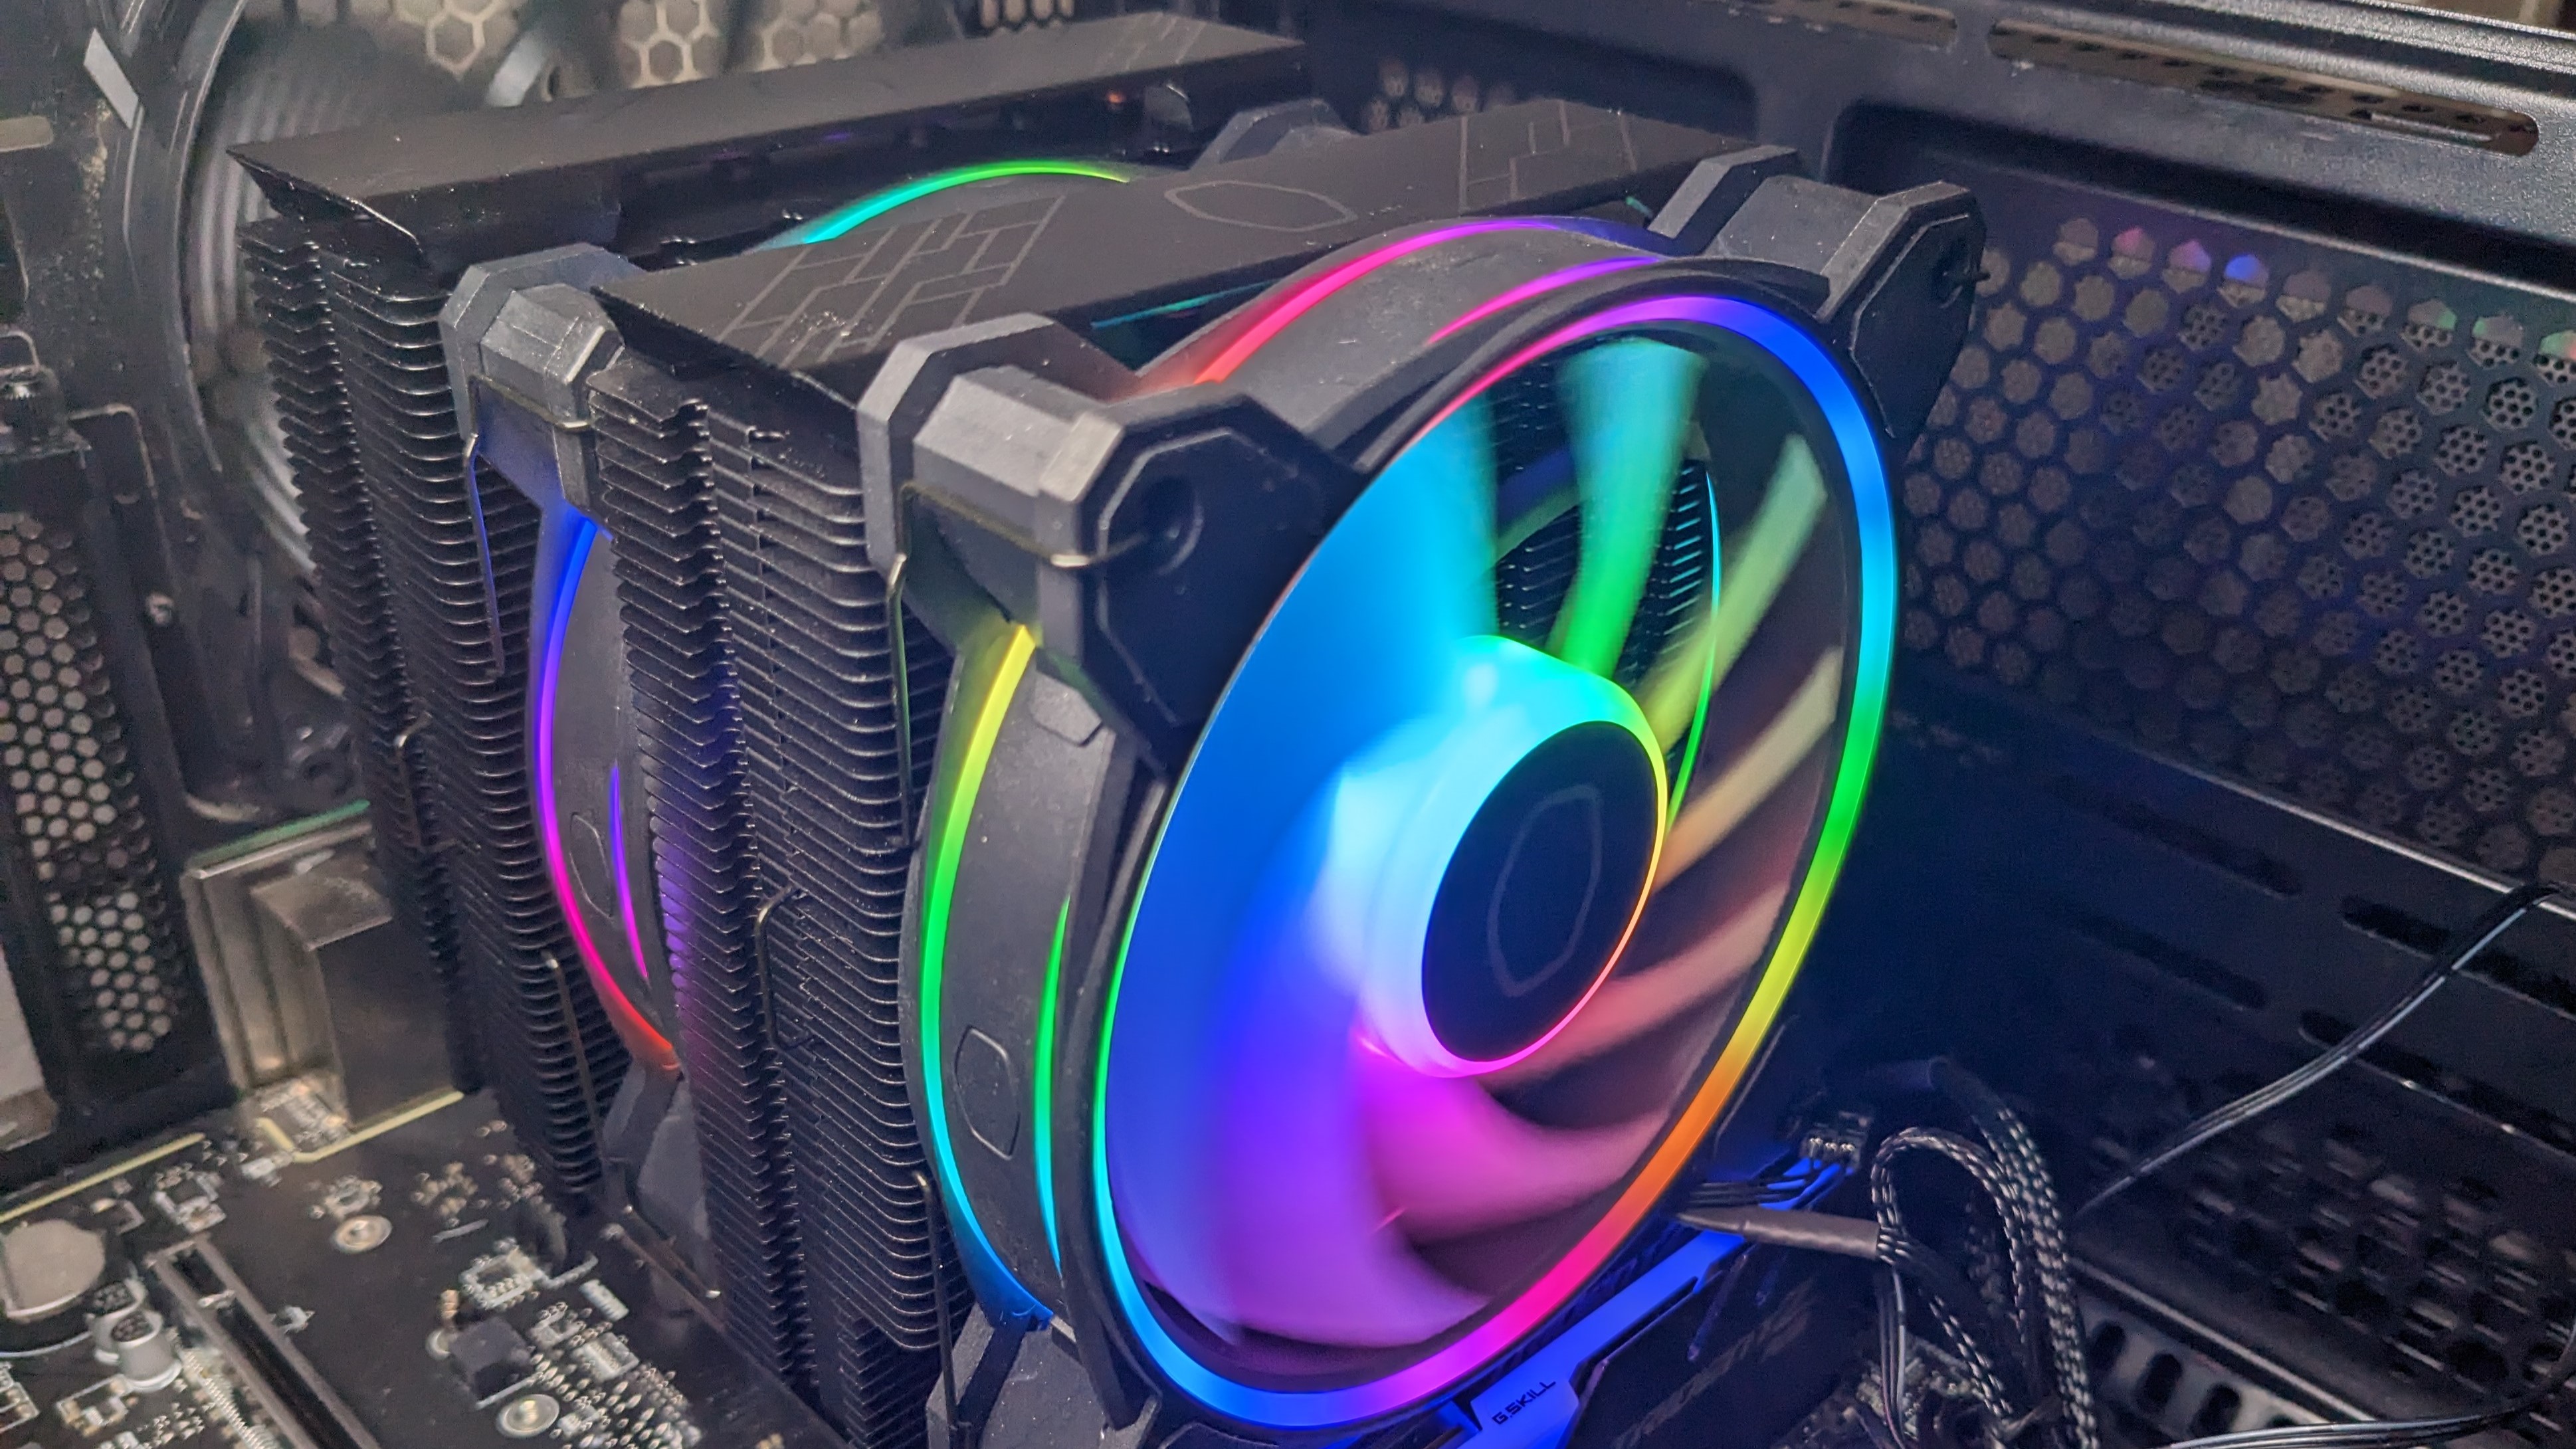 Cooler Master Hyper 622 Halo Review: Quiet Cooling, Ideal for Ryzen